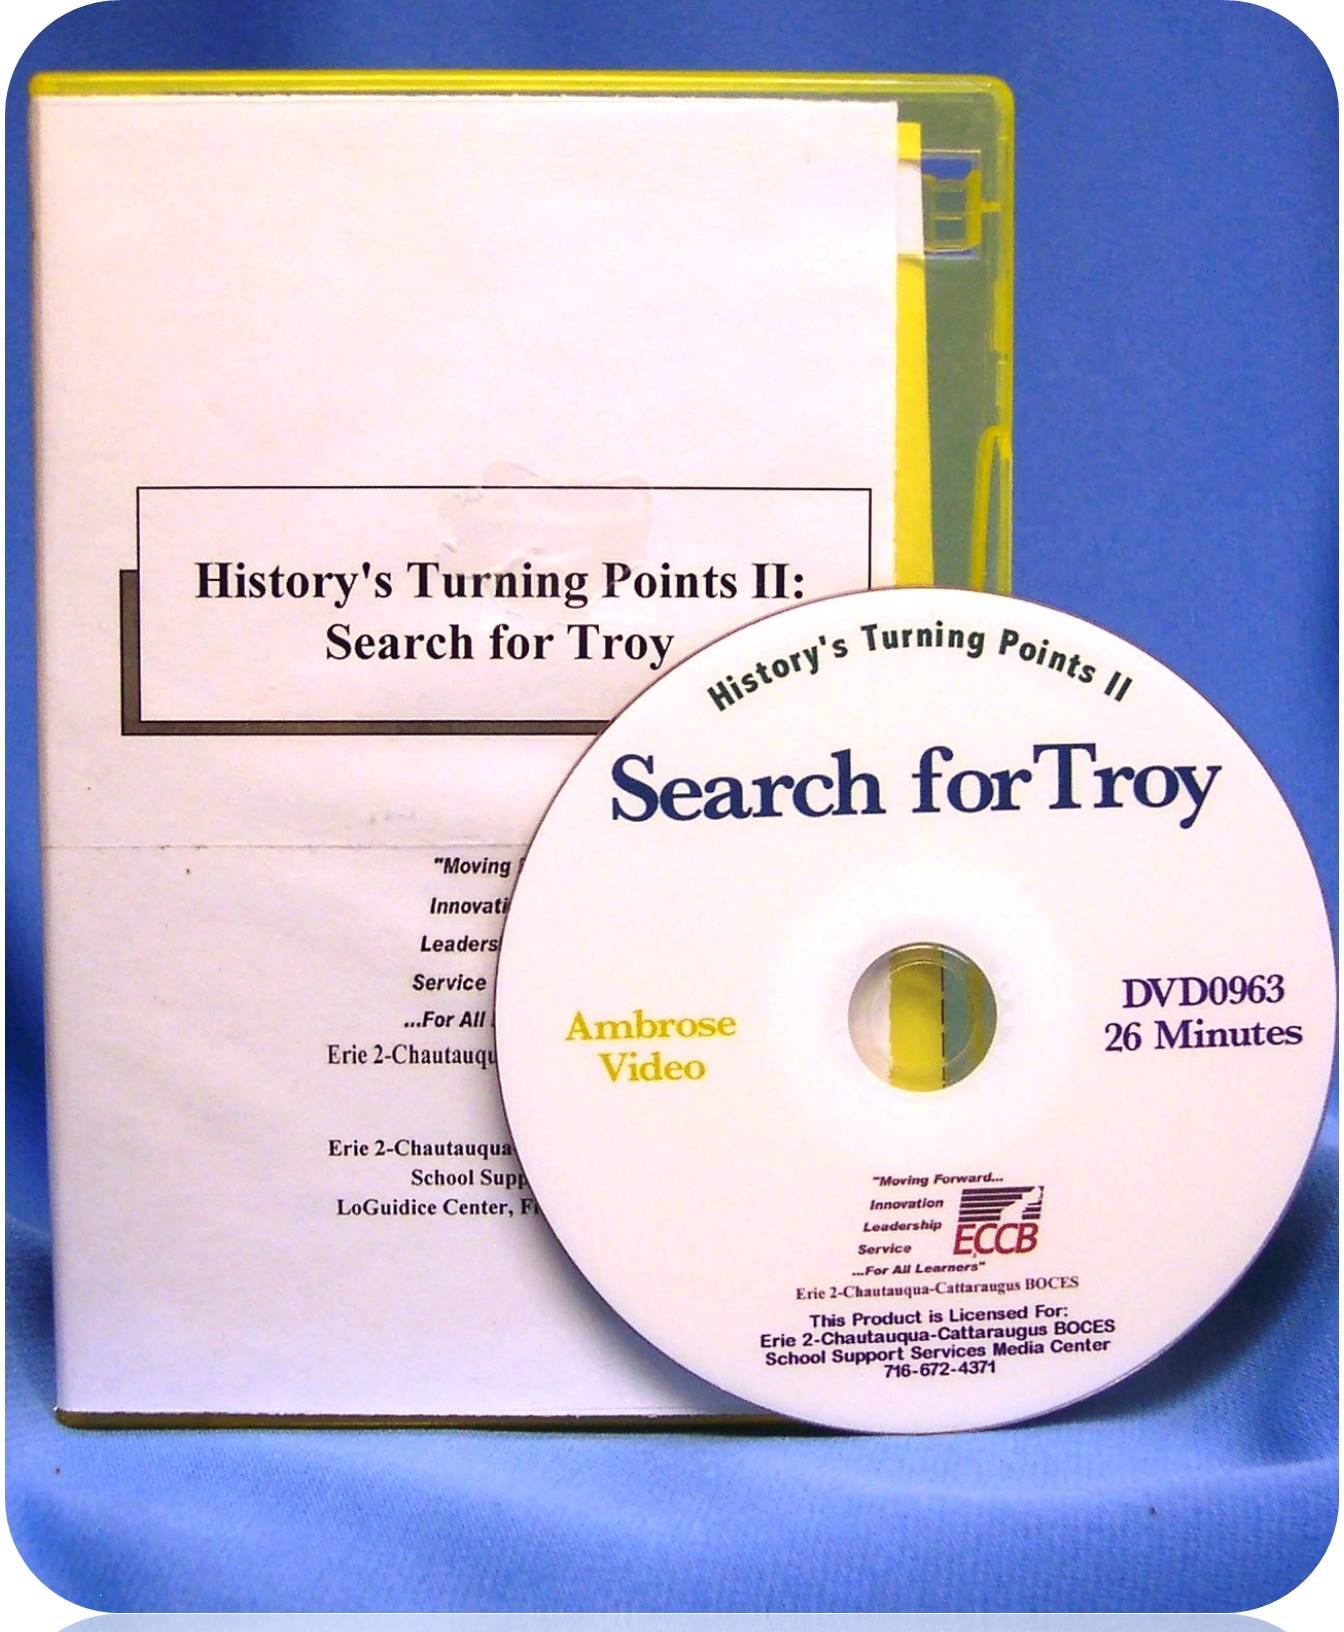 History's Turning Points II: Search for Troy